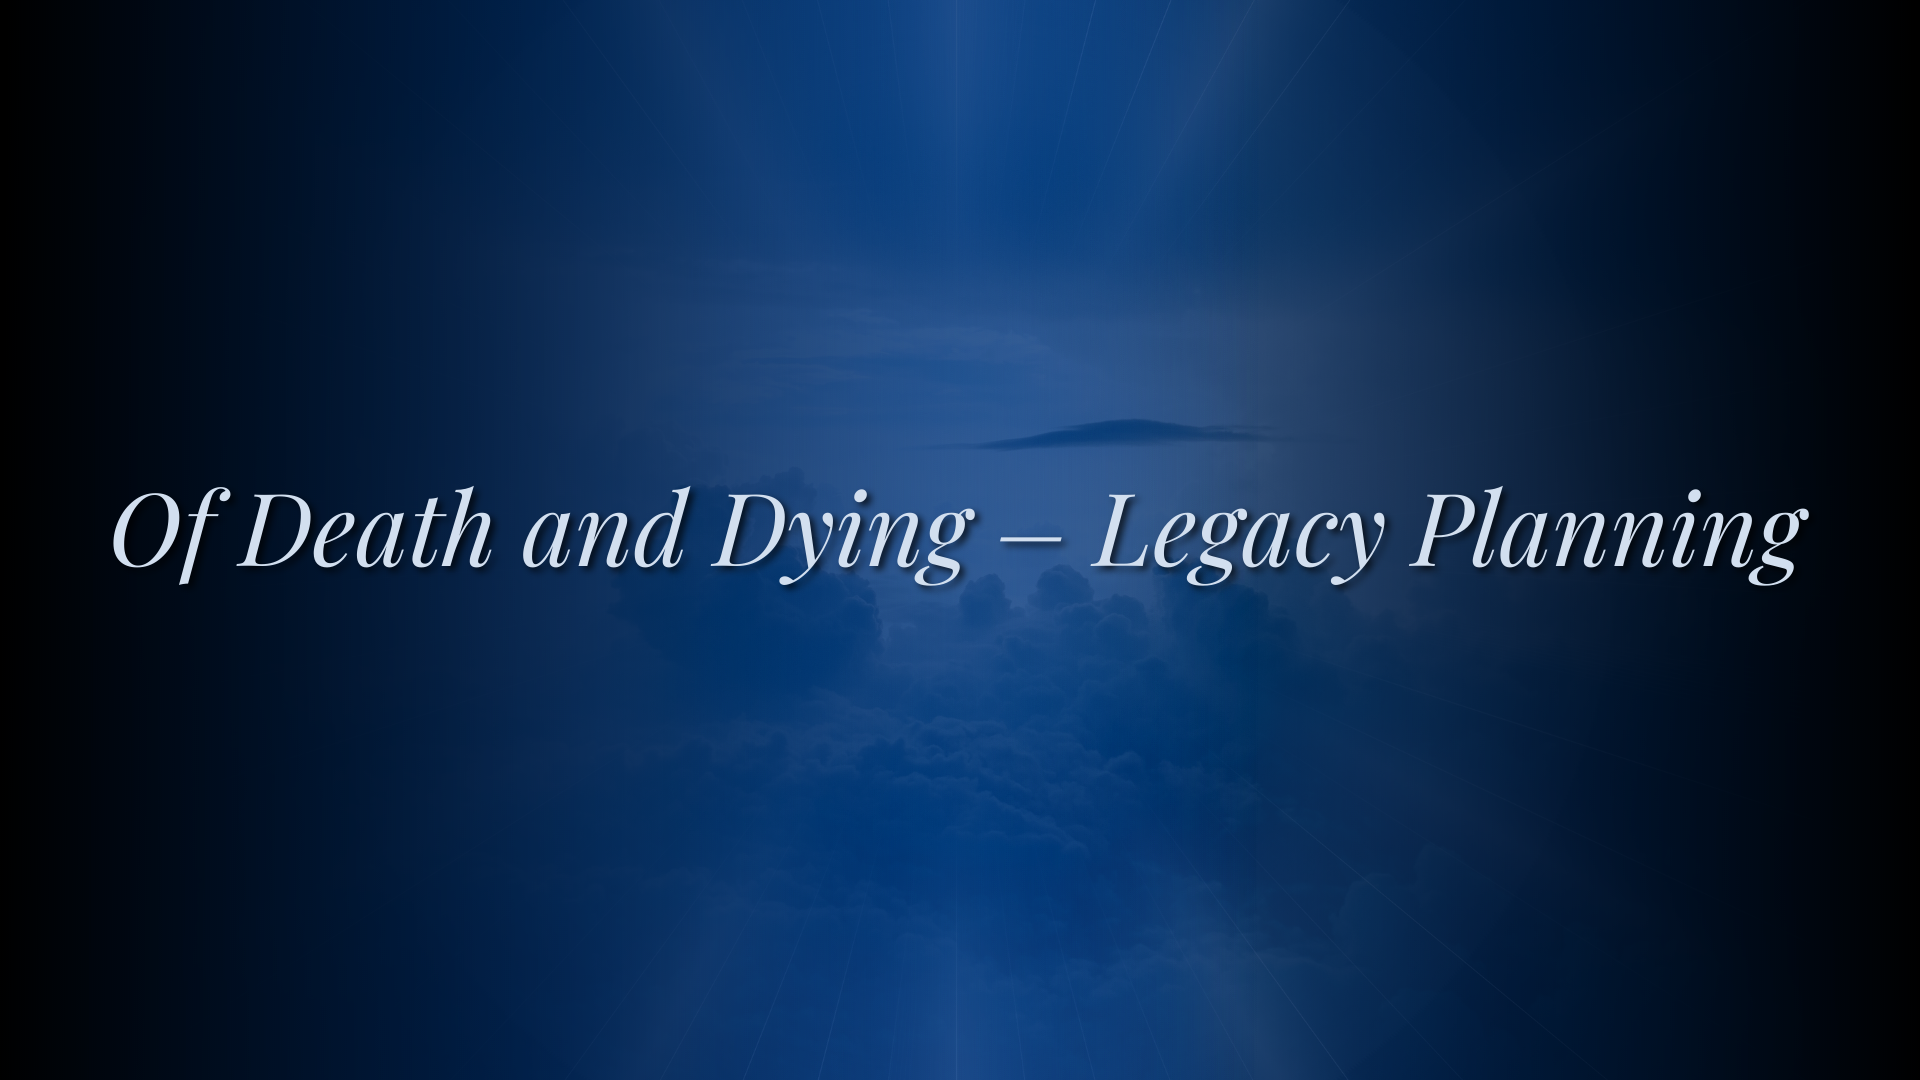 Picture of clouds and a text saying "Of Death and Dying – Legacy Planning "